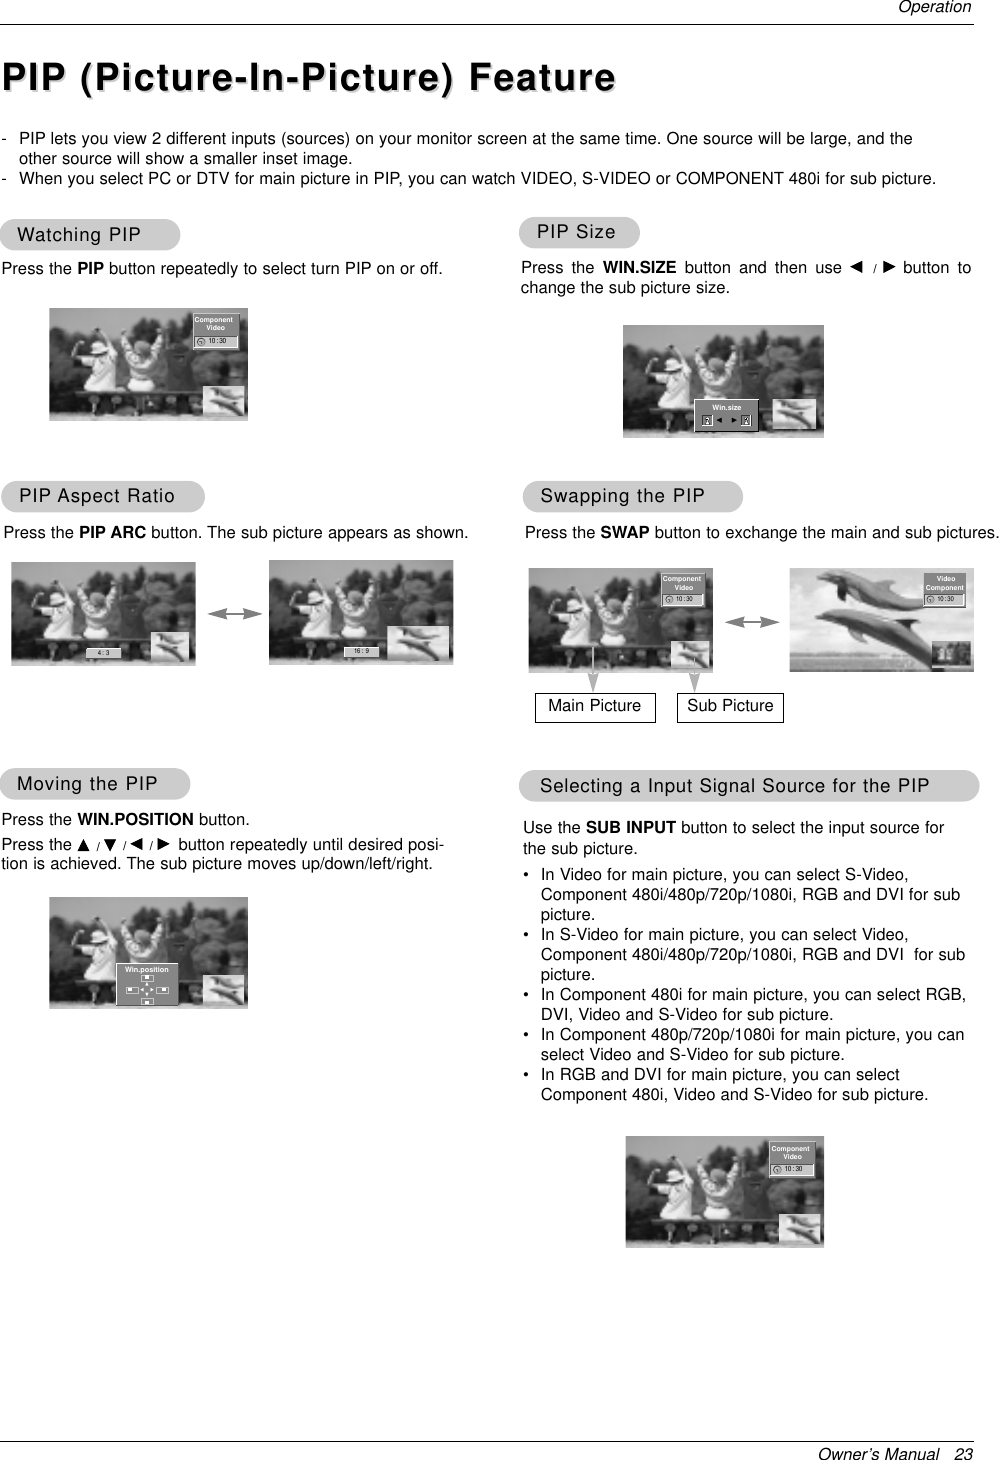 Owner’s Manual   23OperationWWatching PIPatching PIP- PIP lets you view 2 different inputs (sources) on your monitor screen at the same time. One source will be large, and theother source will show a smaller inset image.- When you select PC or DTV for main picture in PIP, you can watch VIDEO, S-VIDEO or COMPONENT 480i for sub picture.Press the PIP button repeatedly to select turn PIP on or off.PIPPIP SizeSizePress the WIN.SIZE button and then use F  /  Gbutton tochange the sub picture size.PIPPIP Aspect RatioAspect RatioPress the PIP ARC button. The sub picture appears as shown.Moving the PIPMoving the PIPPress the WIN.POSITION button. Press the D / E/ F / Gbutton repeatedly until desired posi-tion is achieved. The sub picture moves up/down/left/right.Swapping the PIPSwapping the PIPPress the SWAP button to exchange the main and sub pictures.Selecting a Input Signal Source for the PIPSelecting a Input Signal Source for the PIPUse the SUB INPUT button to select the input source forthe sub picture.•In Video for main picture, you can select S-Video,Component 480i/480p/720p/1080i, RGB and DVI for subpicture.•In S-Video for main picture, you can select Video,Component 480i/480p/720p/1080i, RGB and DVI  for subpicture.•In Component 480i for main picture, you can select RGB,DVI, Video and S-Video for sub picture.•In Component 480p/720p/1080i for main picture, you canselect Video and S-Video for sub picture.•In RGB and DVI for main picture, you can selectComponent 480i, Video and S-Video for sub picture.Main Picture Sub Picture◀▶▲▼10 : 30 10 : 3010 : 304 :  3 16 :  9Win.positionComponentVideoComponentVideoVideoComponentPIPPIP (Picture-In-Picture) Feature(Picture-In-Picture) Feature10 : 30ComponentVideoWin.sizeF G